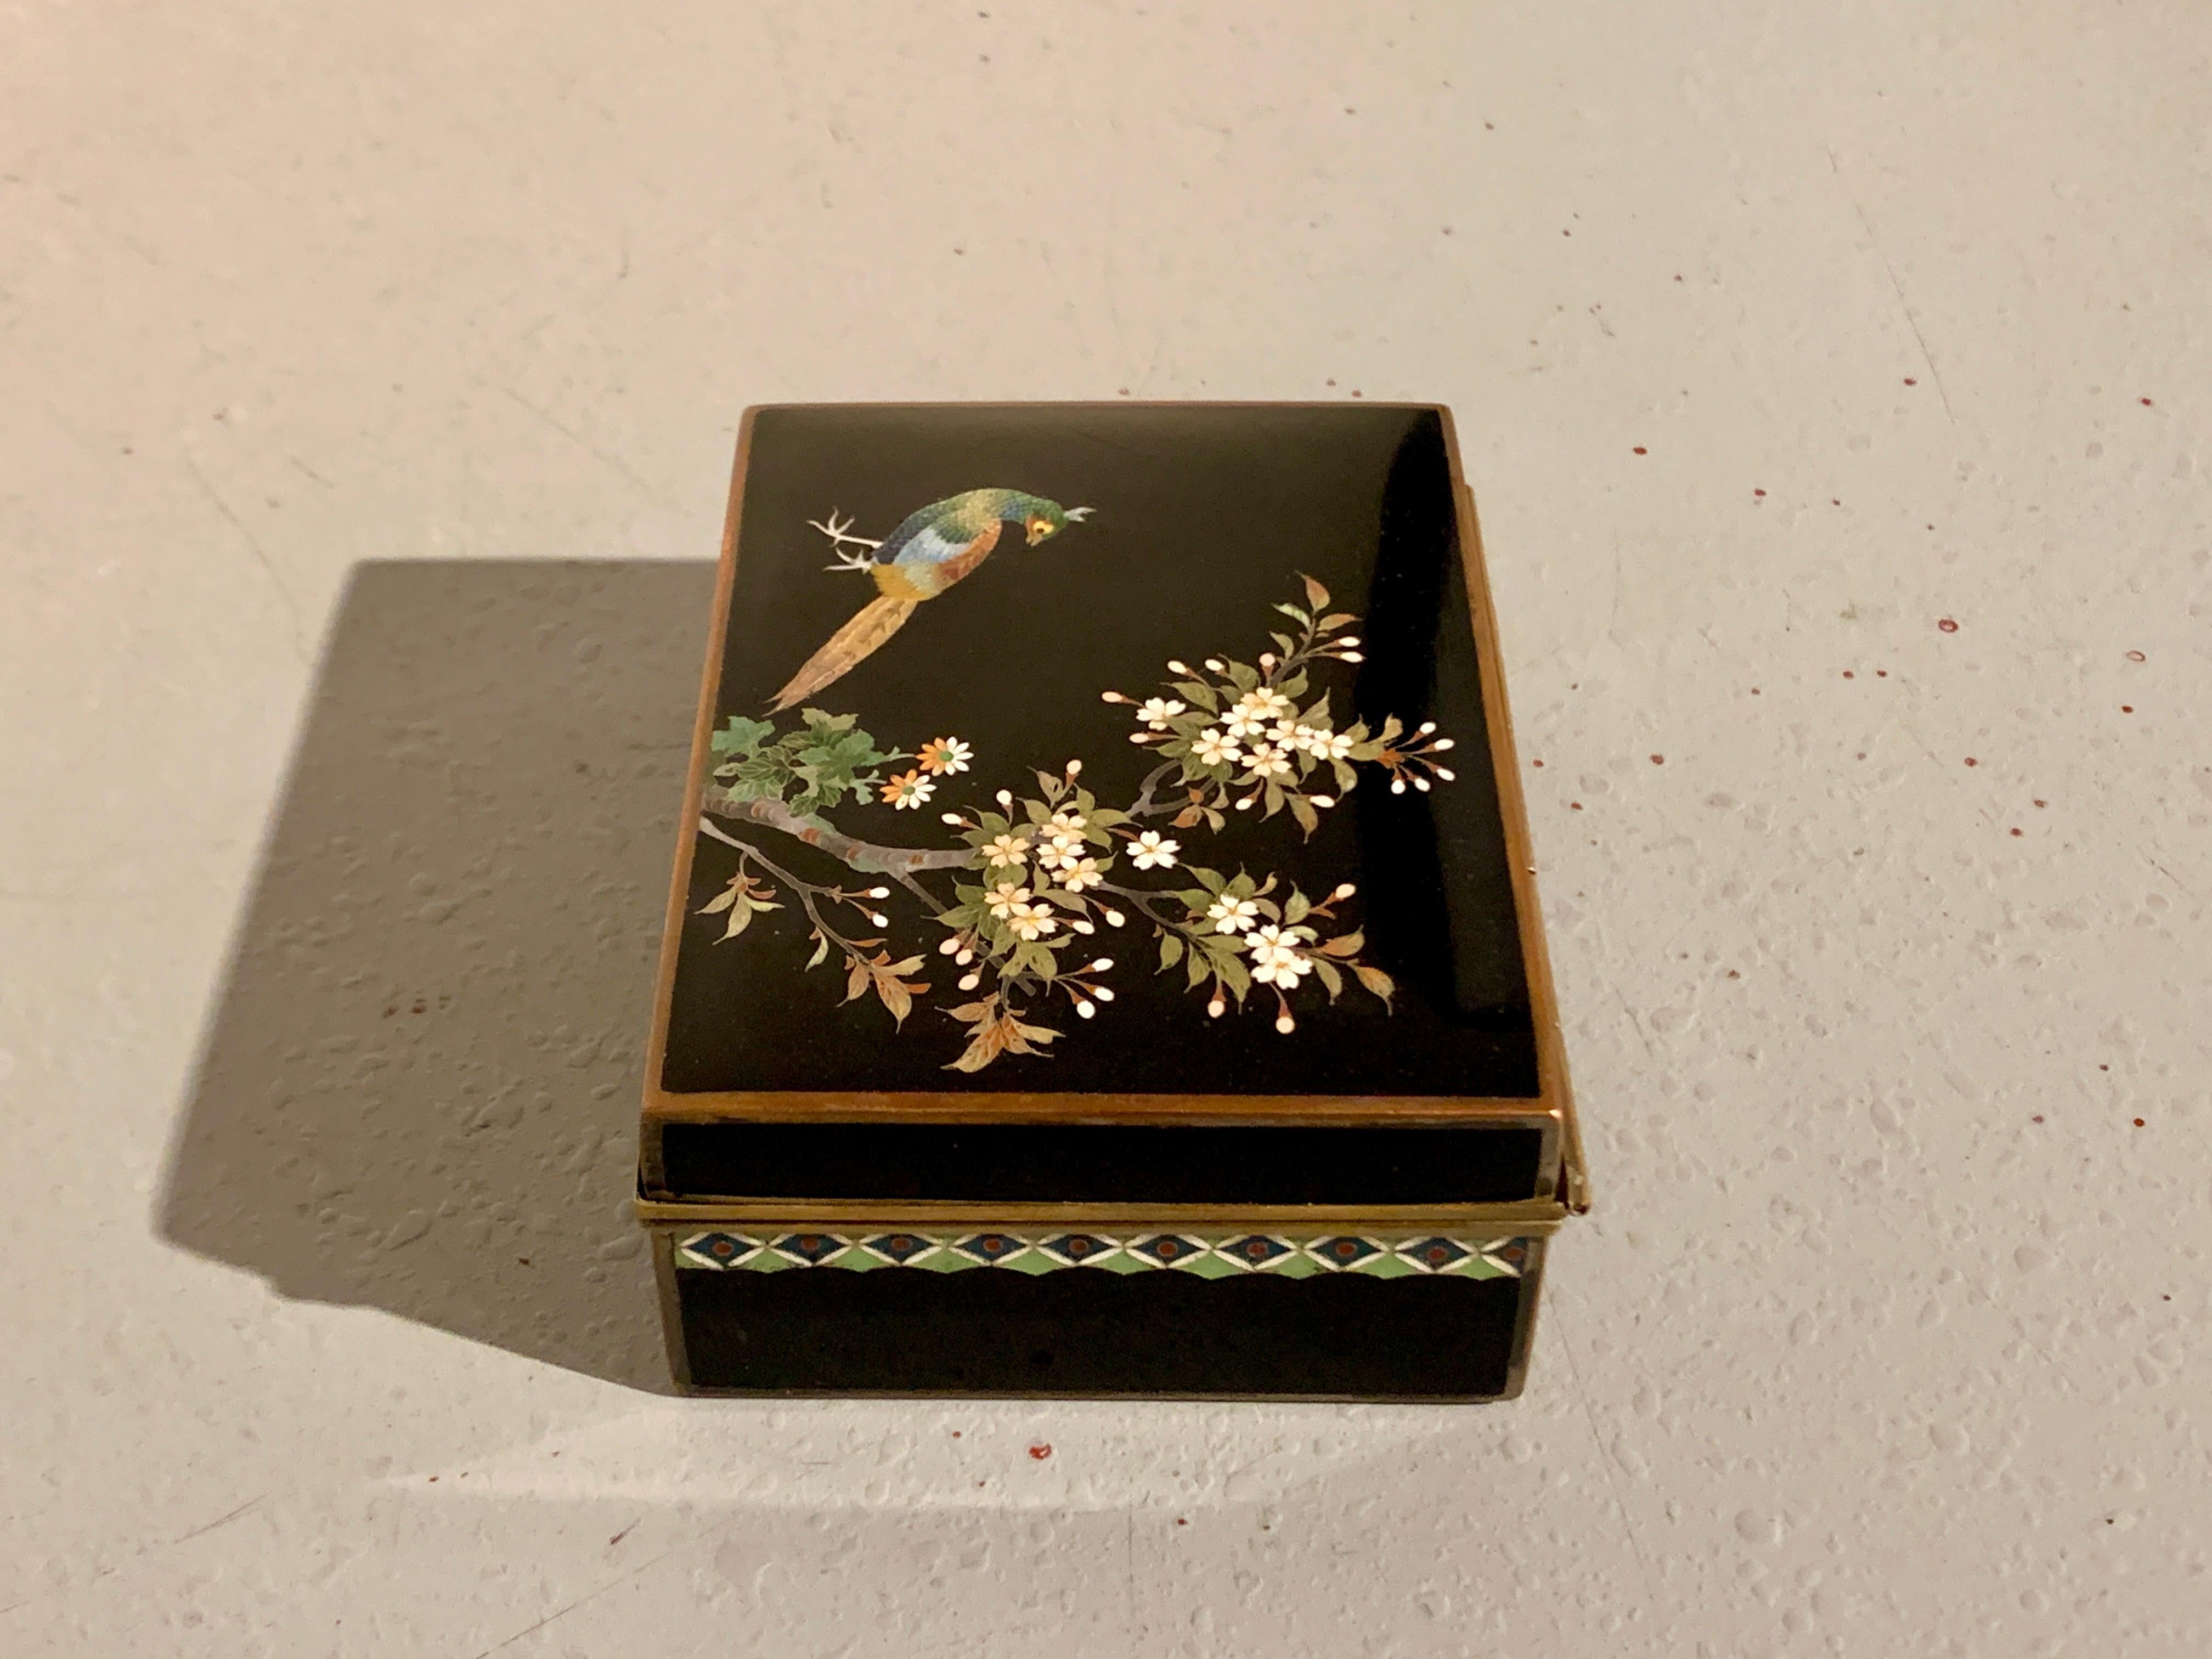 A fine Japanese cloisonne hinged box with pheasant and autumn foliage, by Inaba Nanaho and the Inaba Cloisonne Company, Meiji period, circa 1900, Japan.

The lovely jewelry or trinket box features a design to the lid of a beautiful long tailed